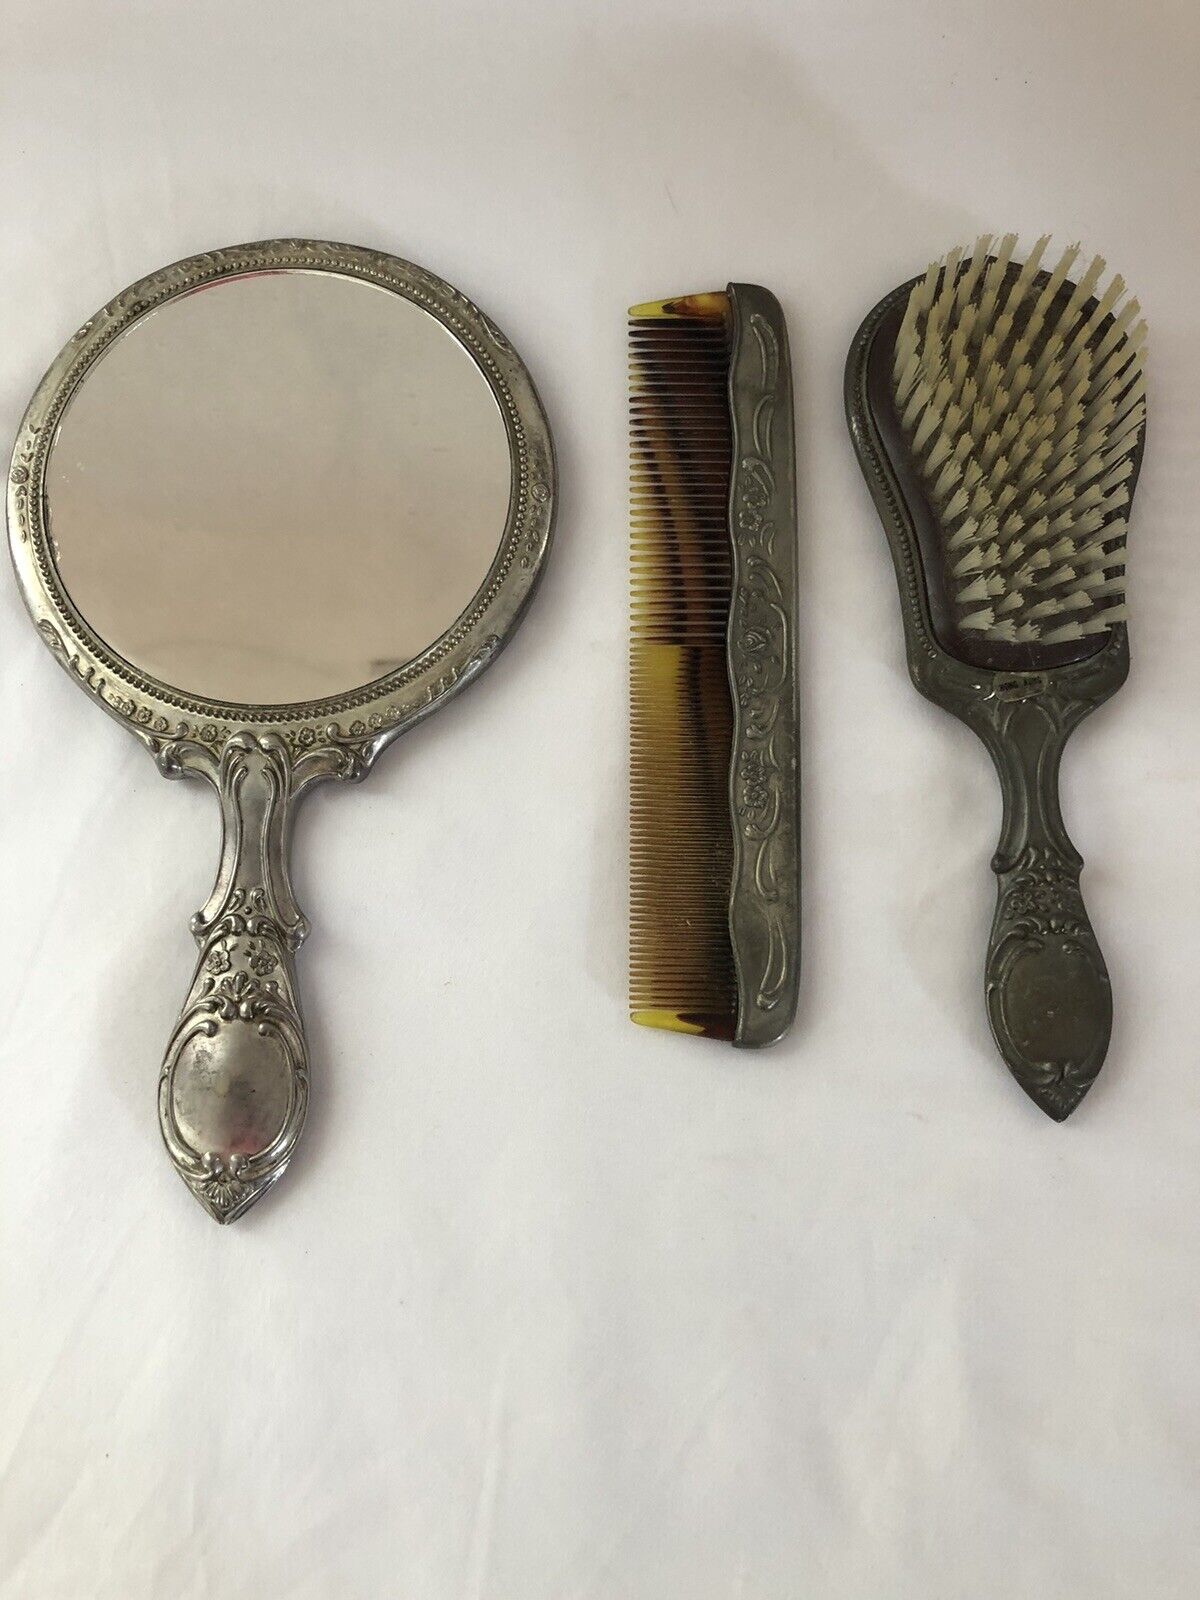 Antique Victorian Ornate  Comb Mirror and Brush Grooming Set Prop